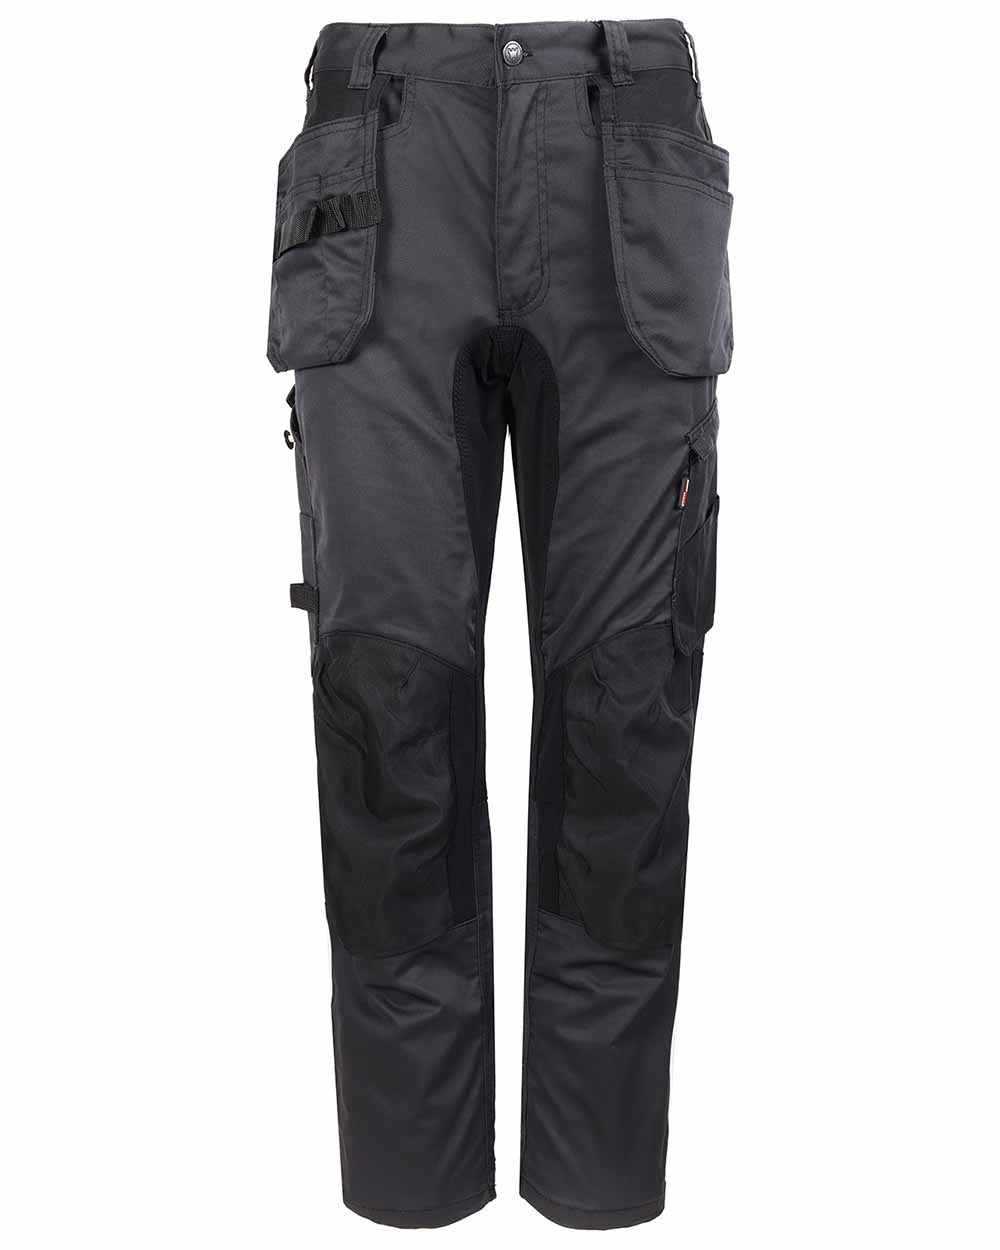 Grey Coloured TuffStuff X Motion Work Trousers On A White Background